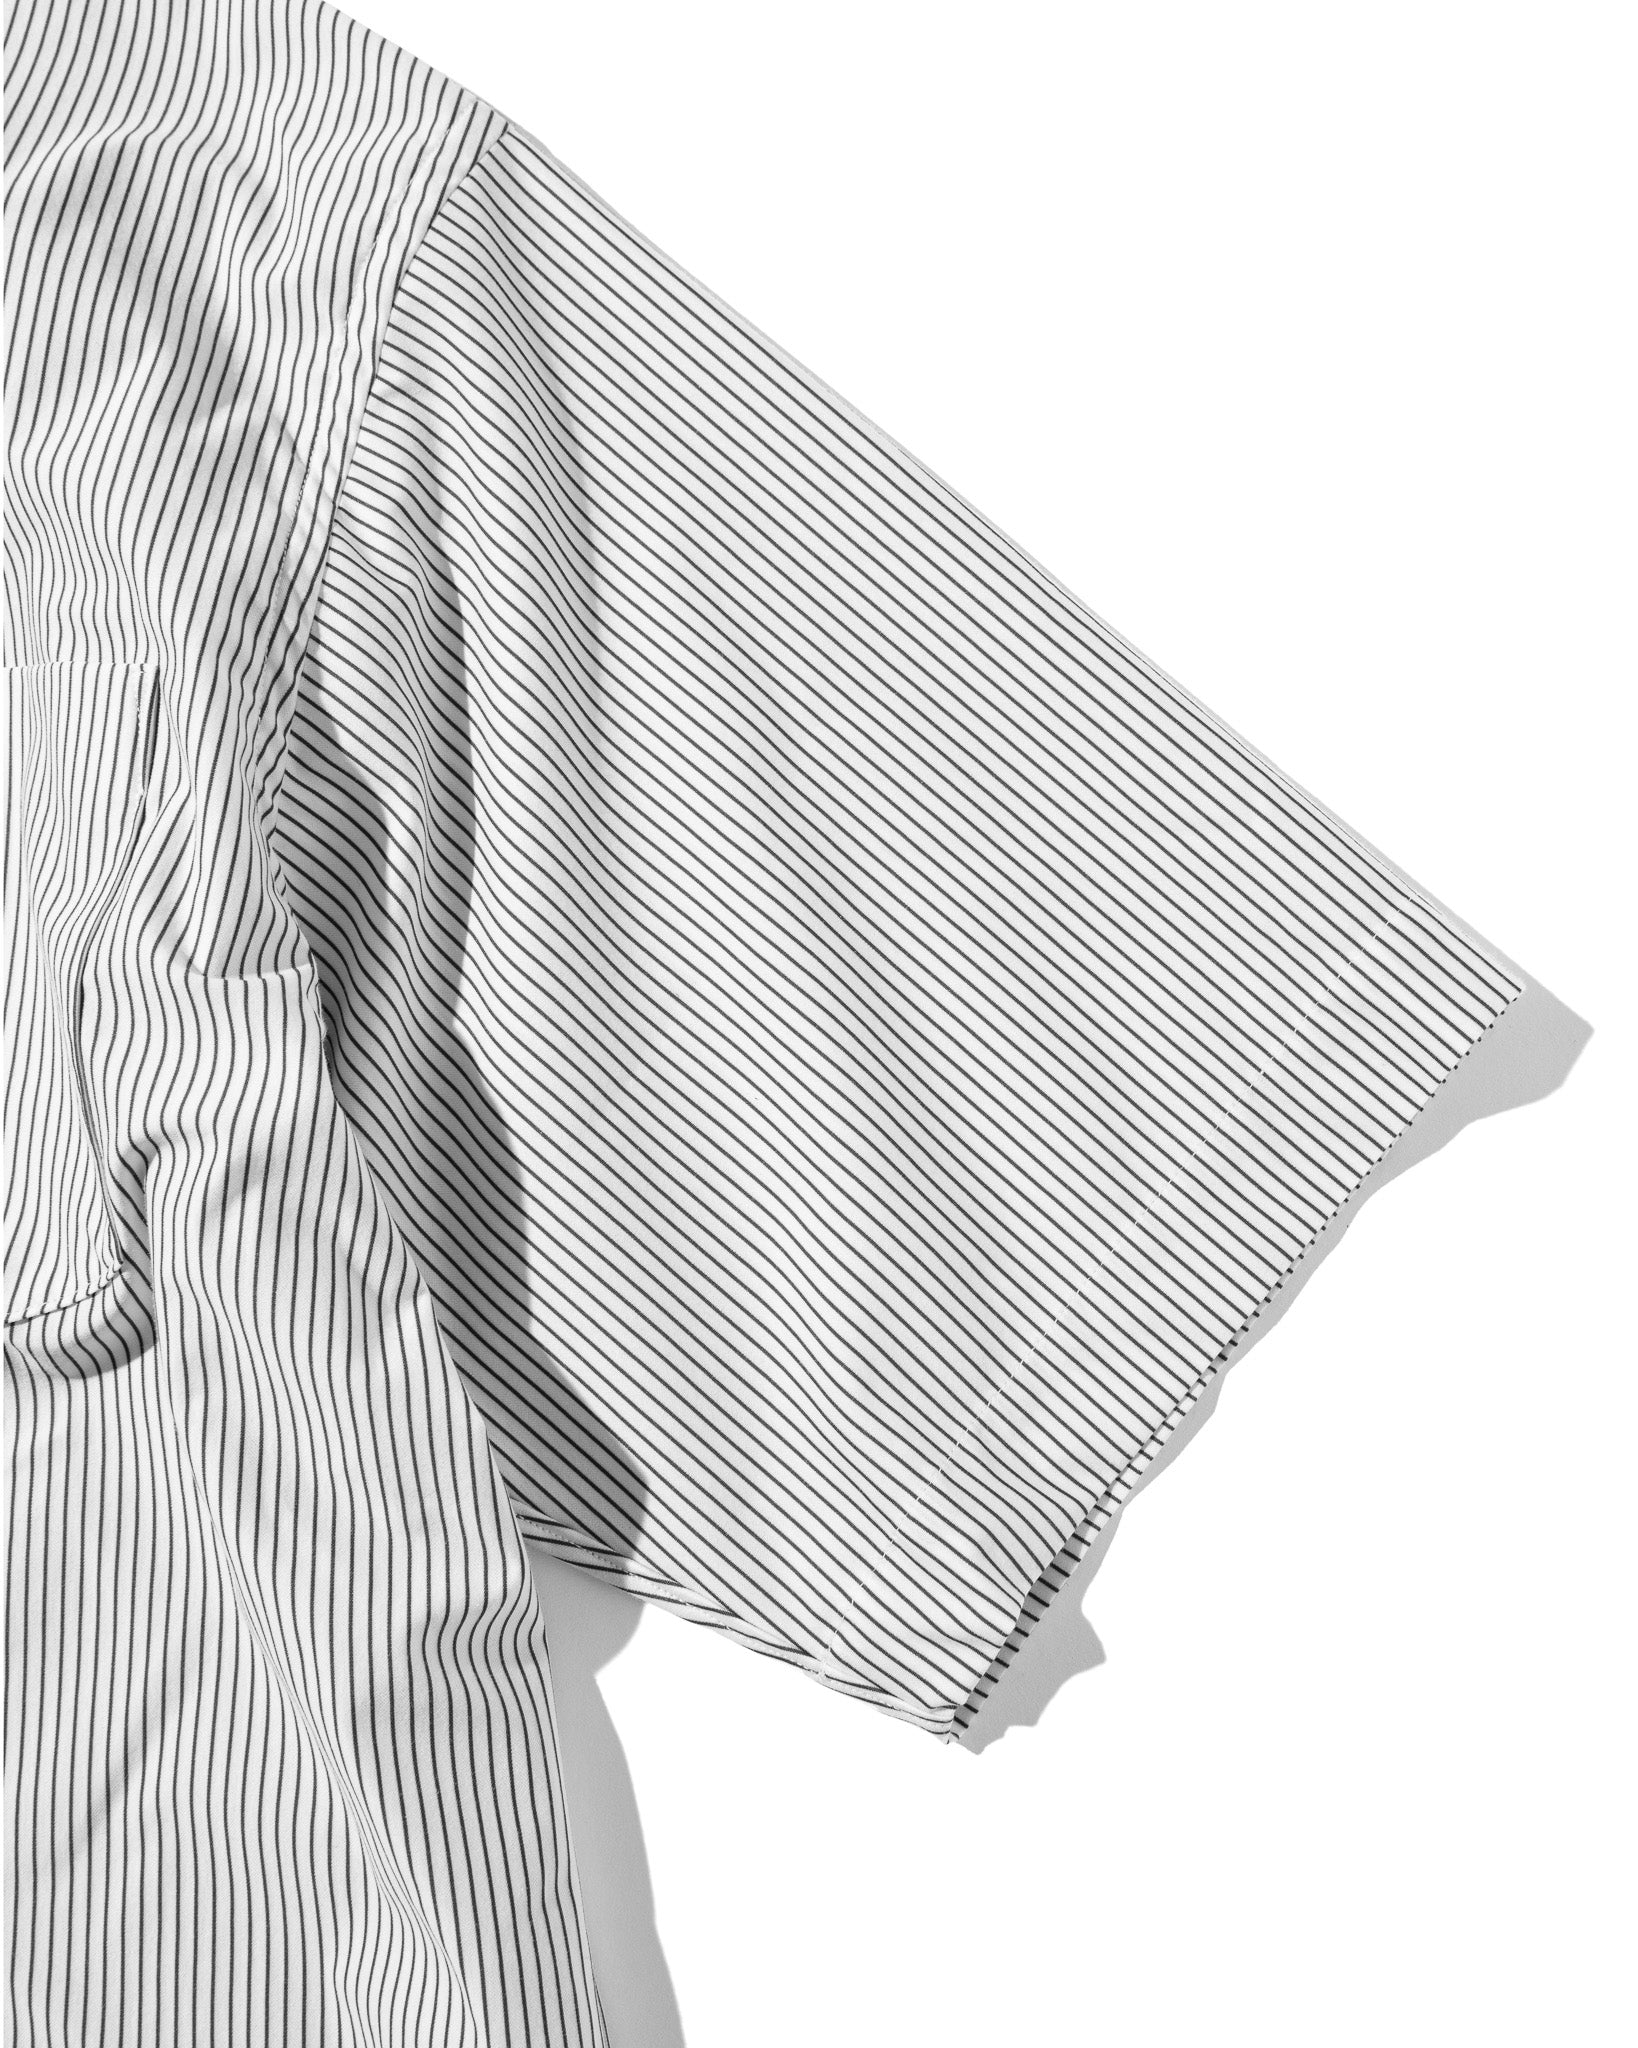 【5.8 WED 20:00- IN STOCK】STRIPED CITY S/S KNIT SHIRTS